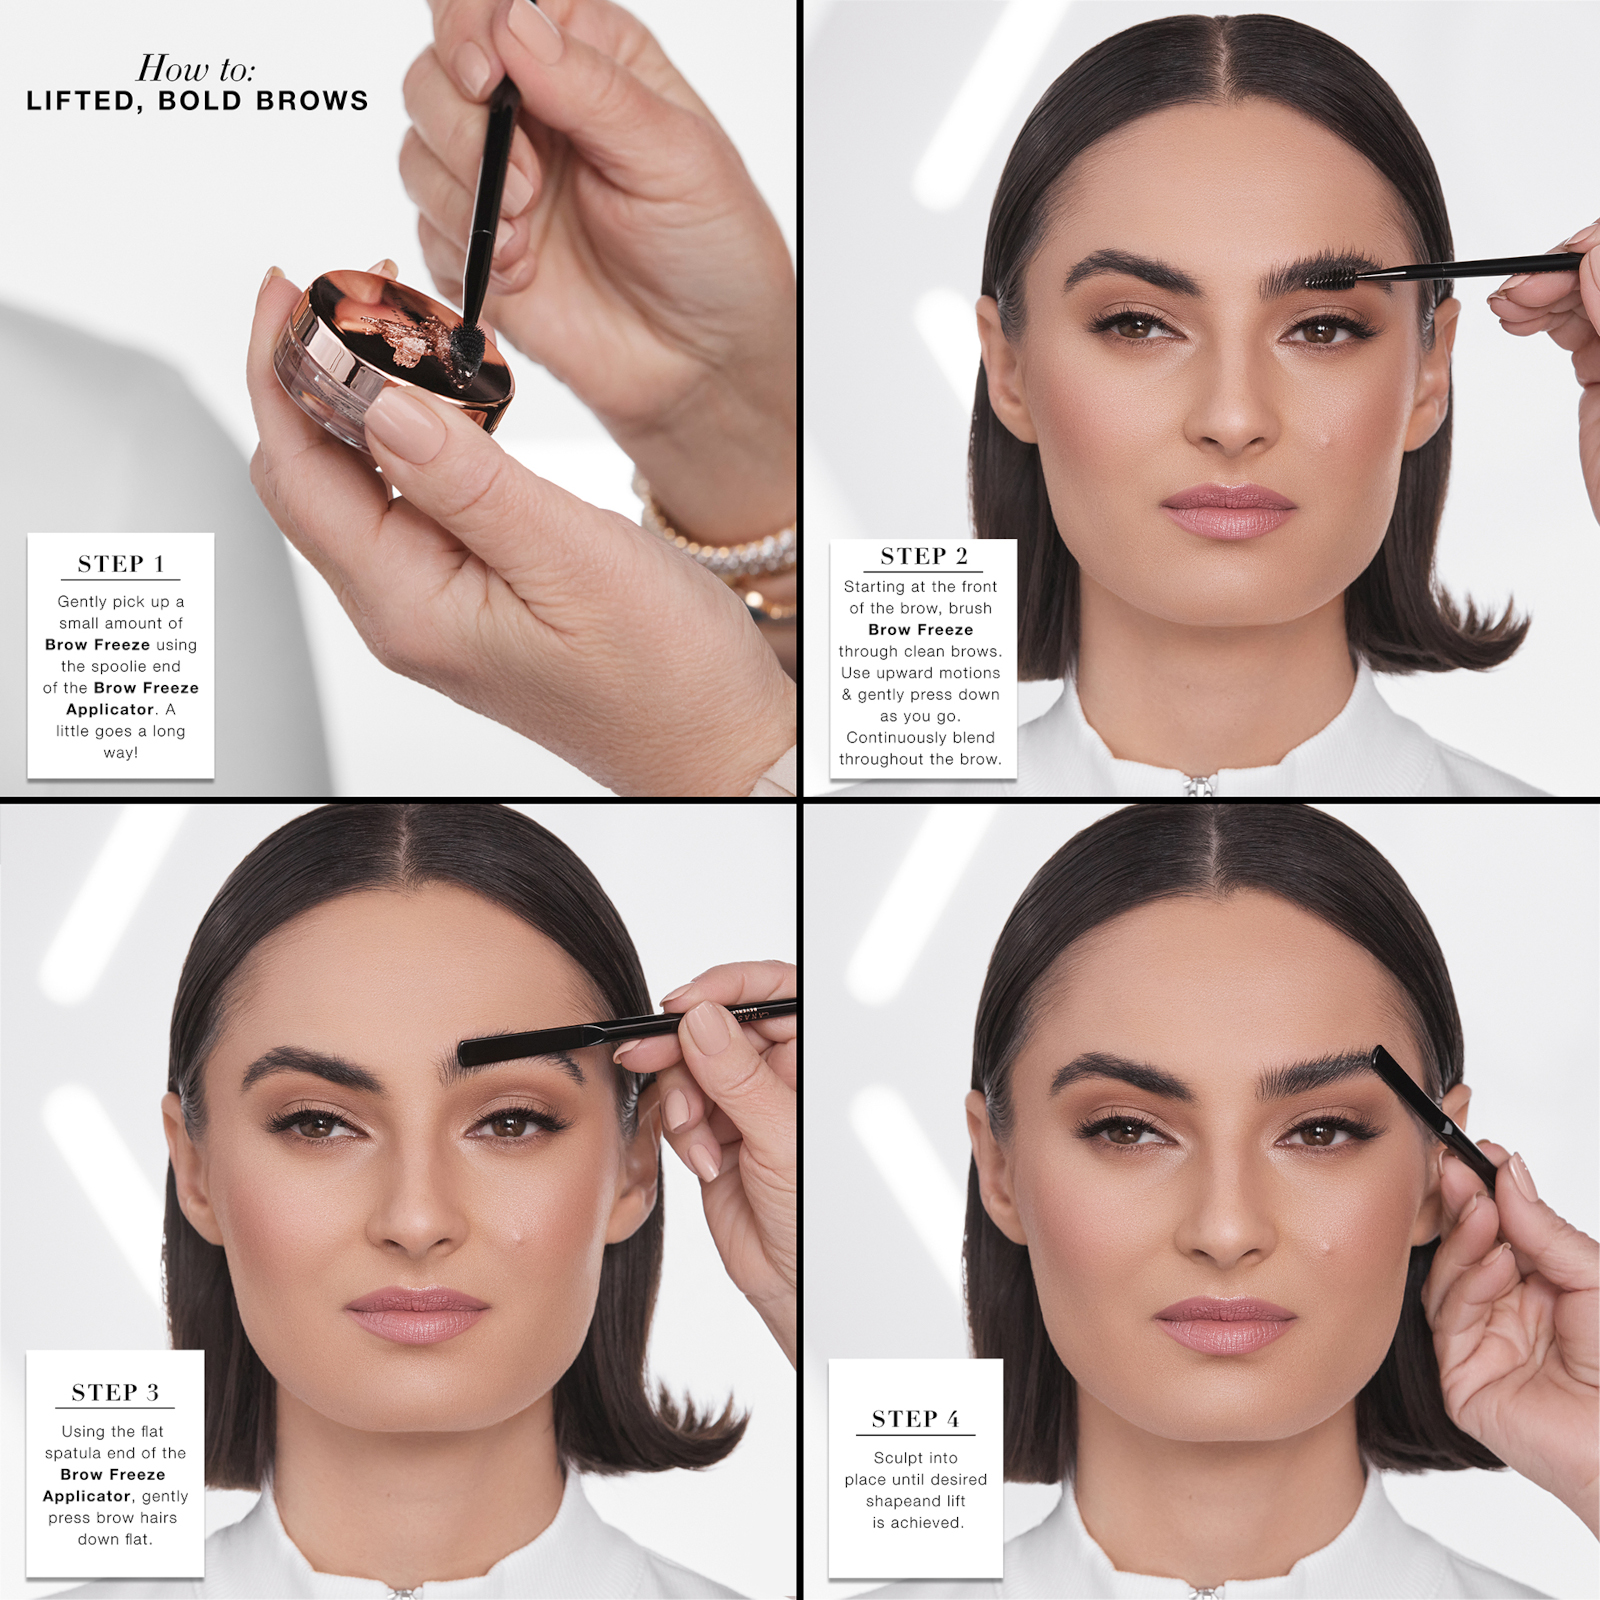 Images showing the step by step guide of how to get lifted, bold brows as explained in the directions